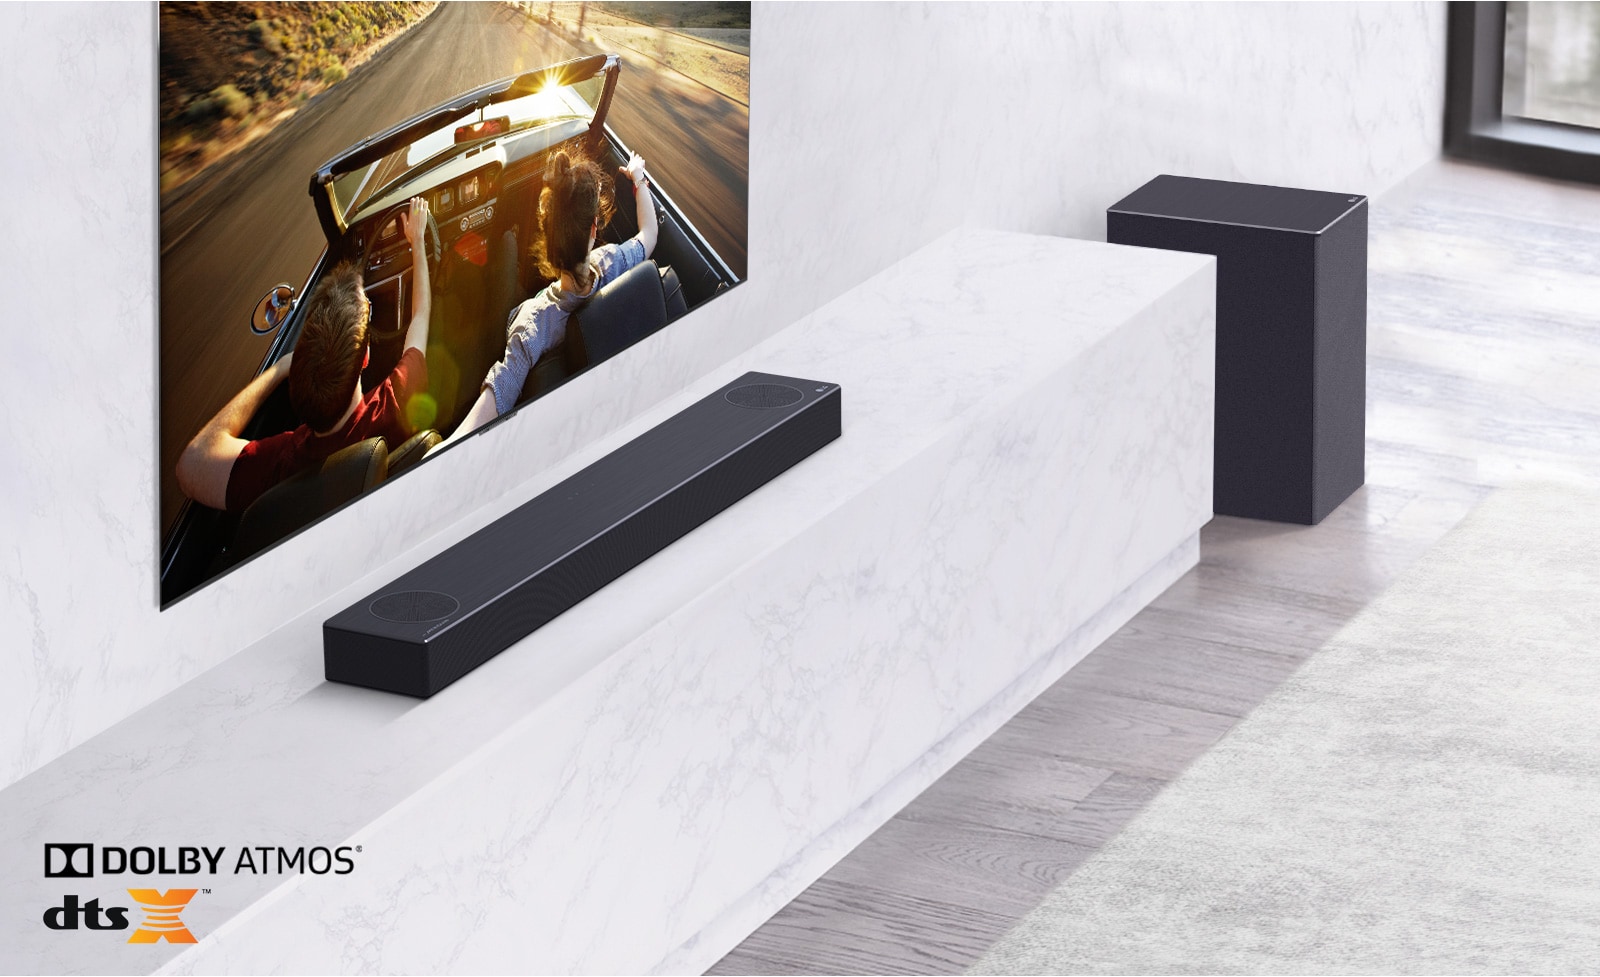 TV is on the wall, LG Soundbar is below on a white marble shelf with a sub-woofer to the right. TV shows a couple in a car.